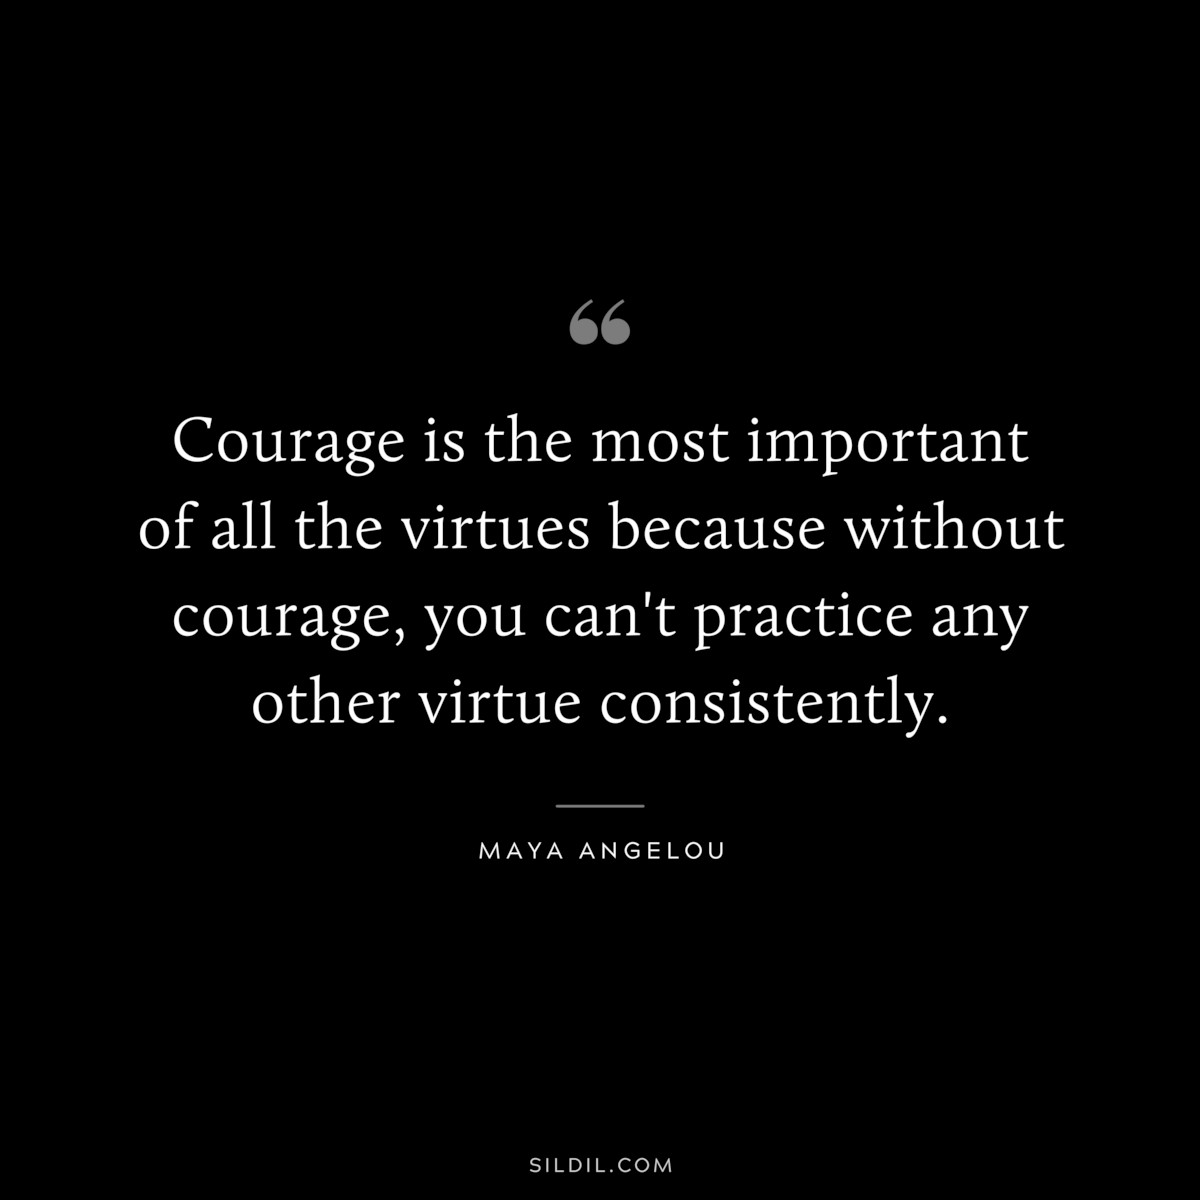 Courage is the most important of all the virtues because without courage, you can't practice any other virtue consistently. ― Maya Angelou